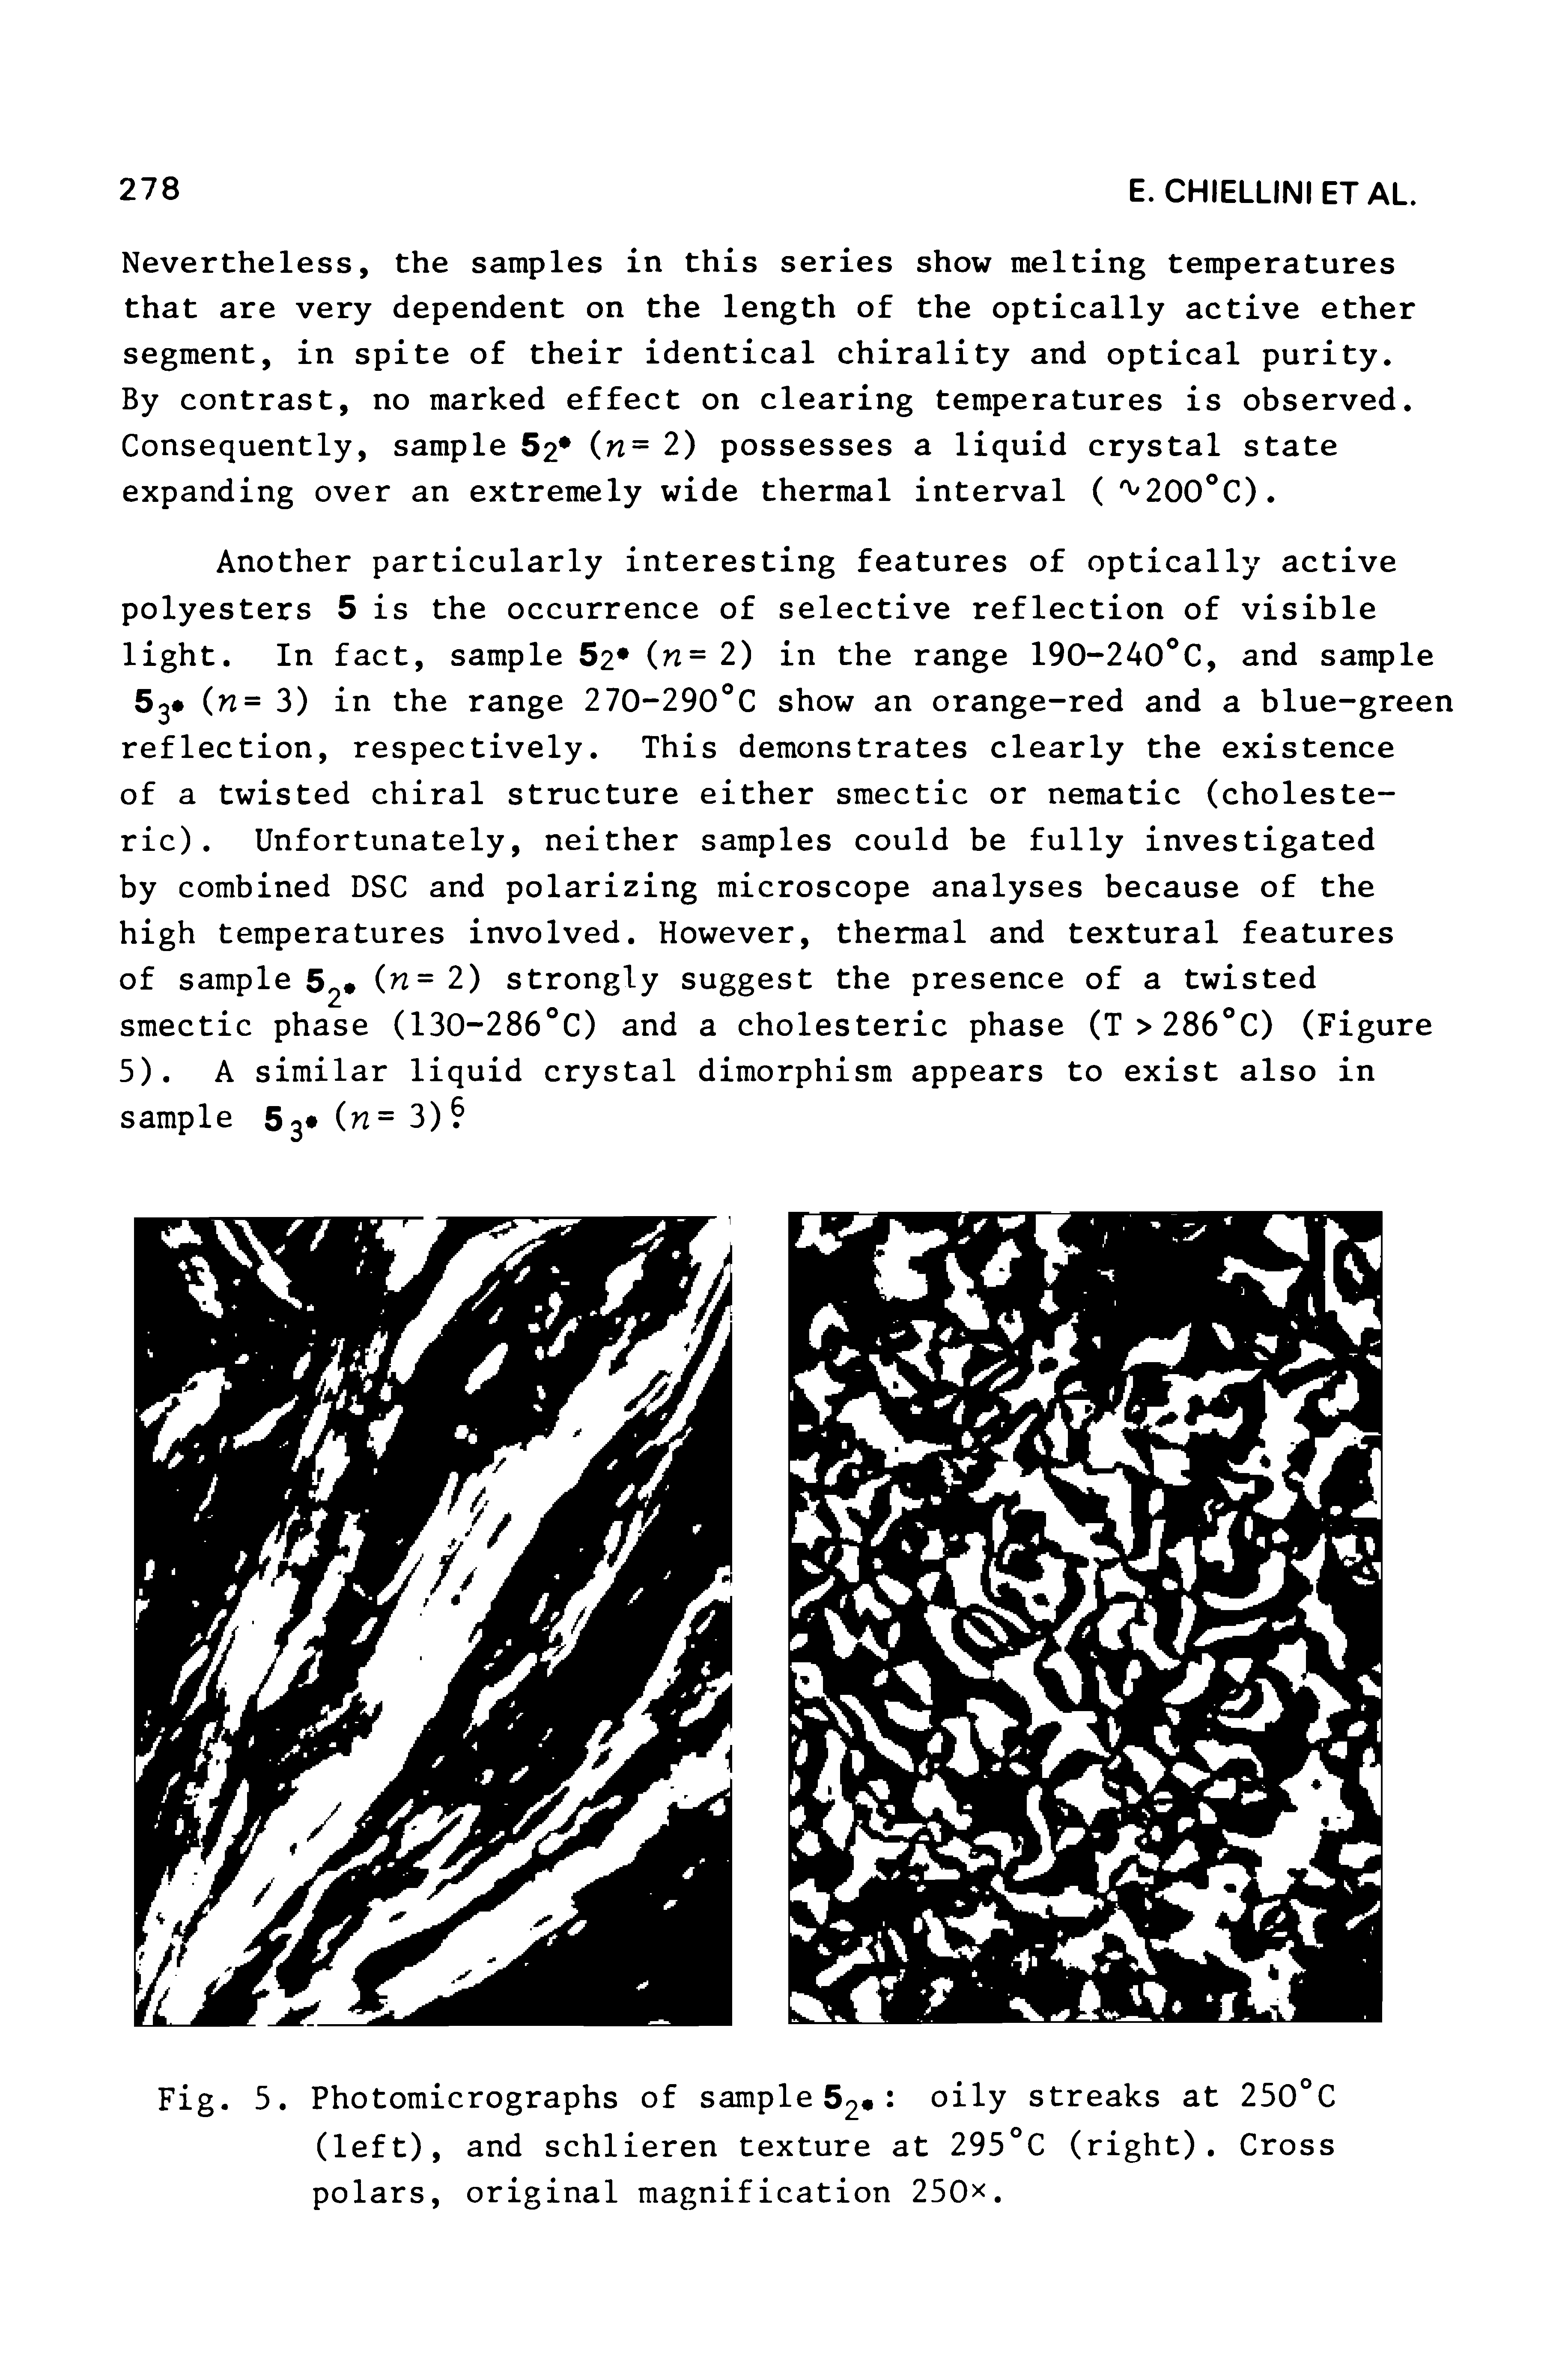 Fig. 5. Photomicrographs of sample 62 oily streaks at 250°C (left), and schlieren texture at 295 C (right). Cross polars, original magnification 250x.